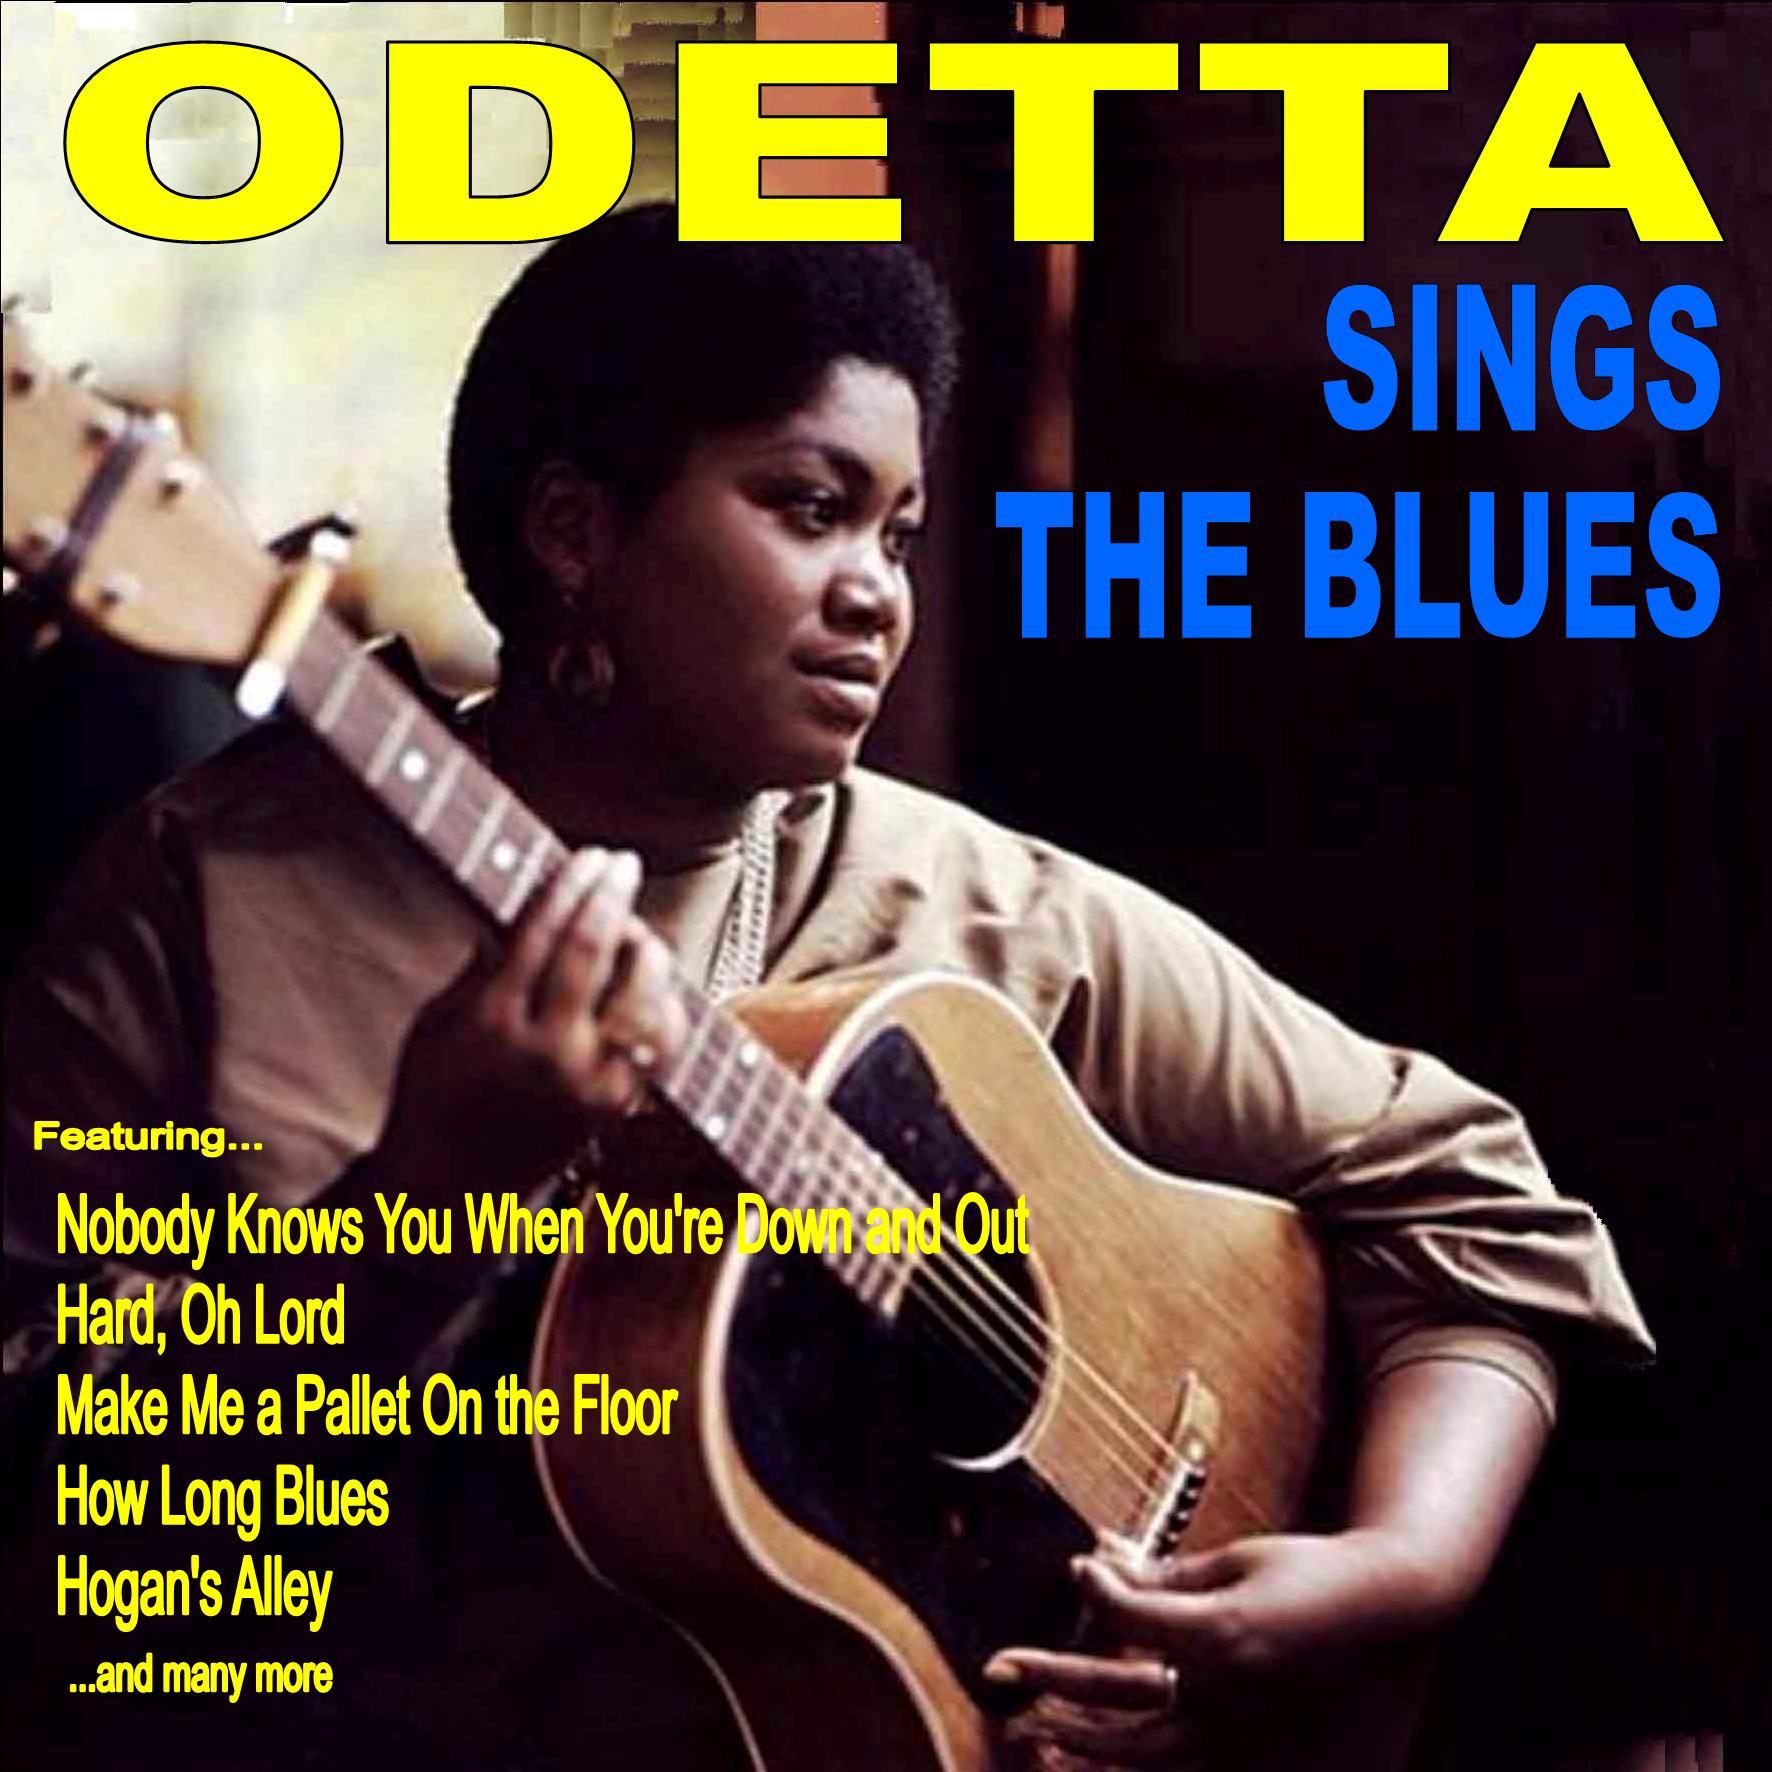 Nobody Knows You When You're Down and Out: Odetta Sings the Blues